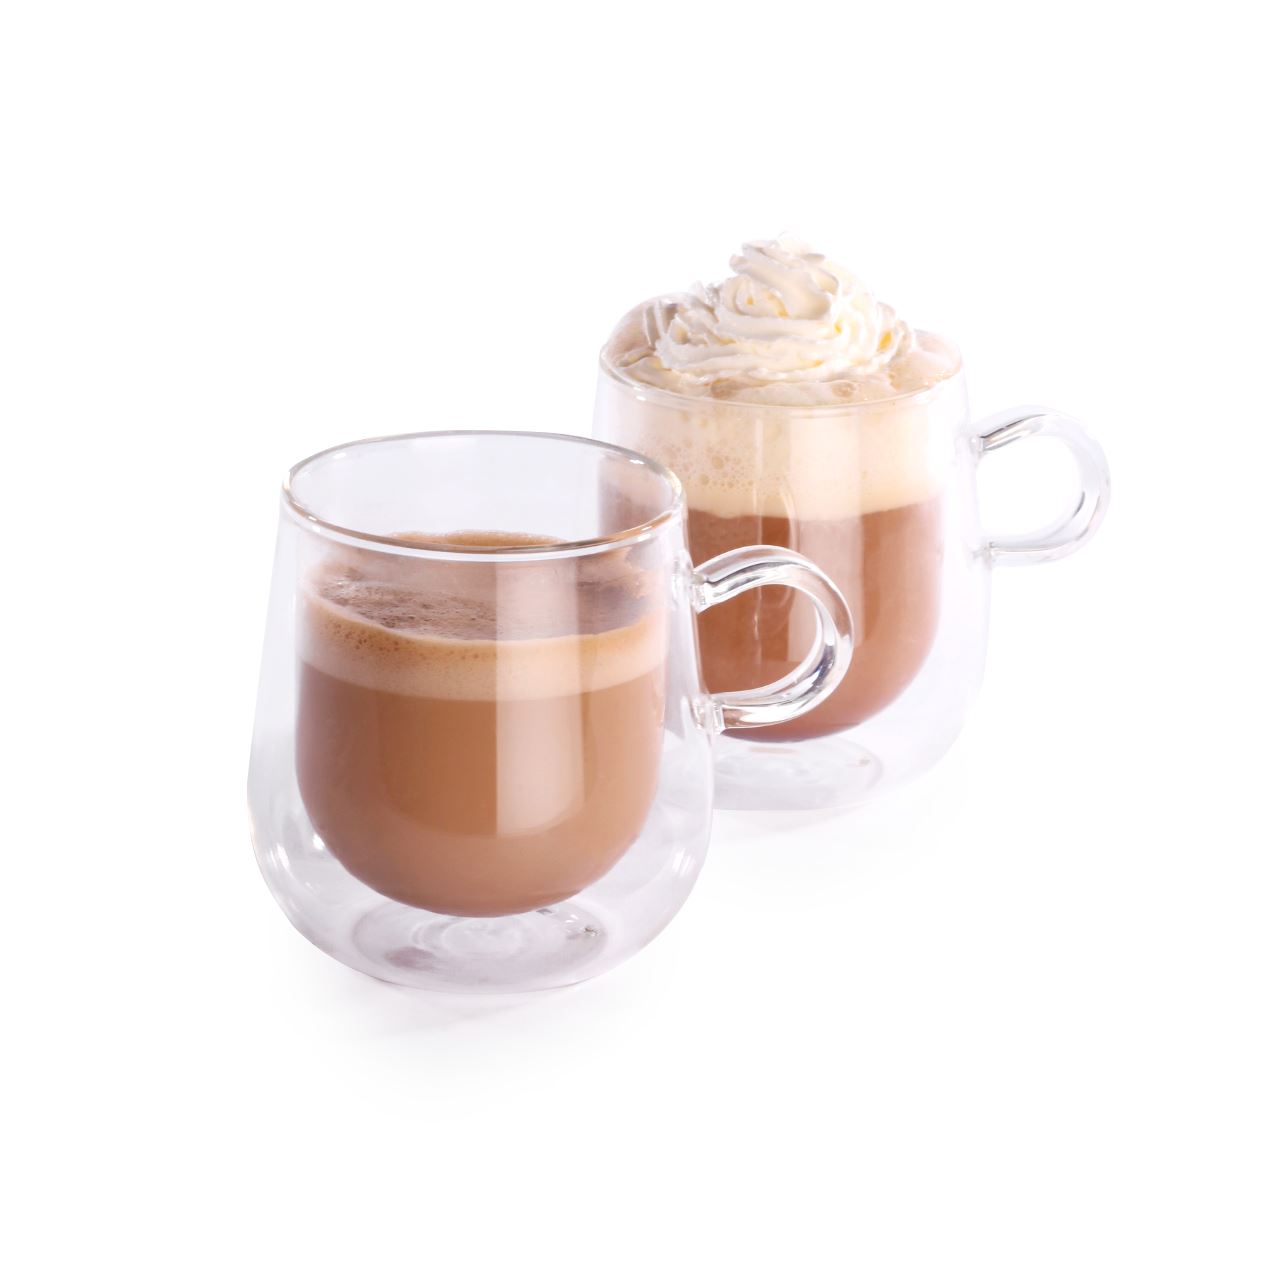 Double Walled 80ml Espresso Coffee Glasses with Handles - Set of 2 | M